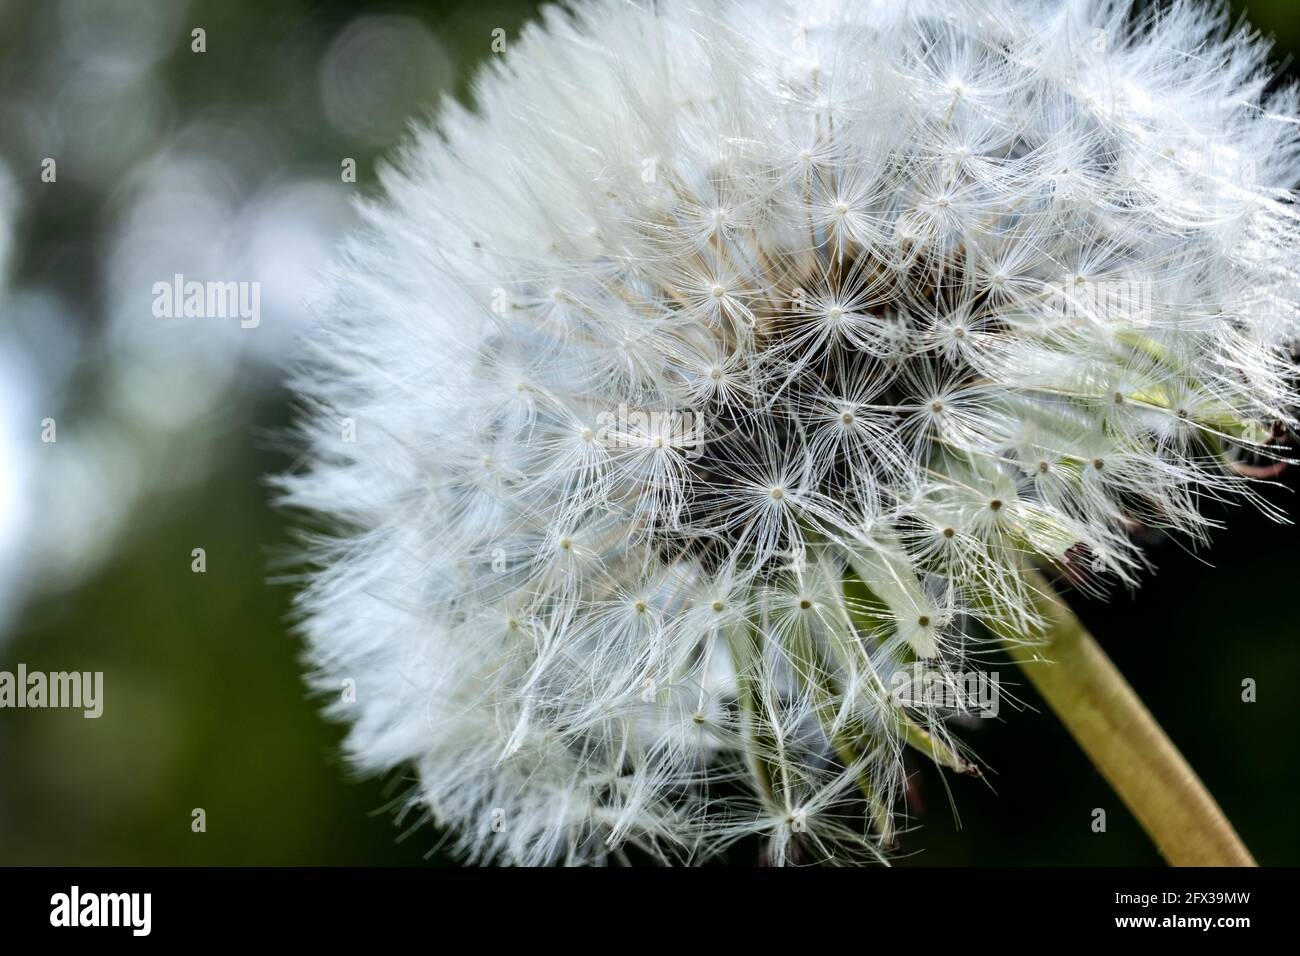 Dandelion flowers gone to seed in an English wood. Stock Photo